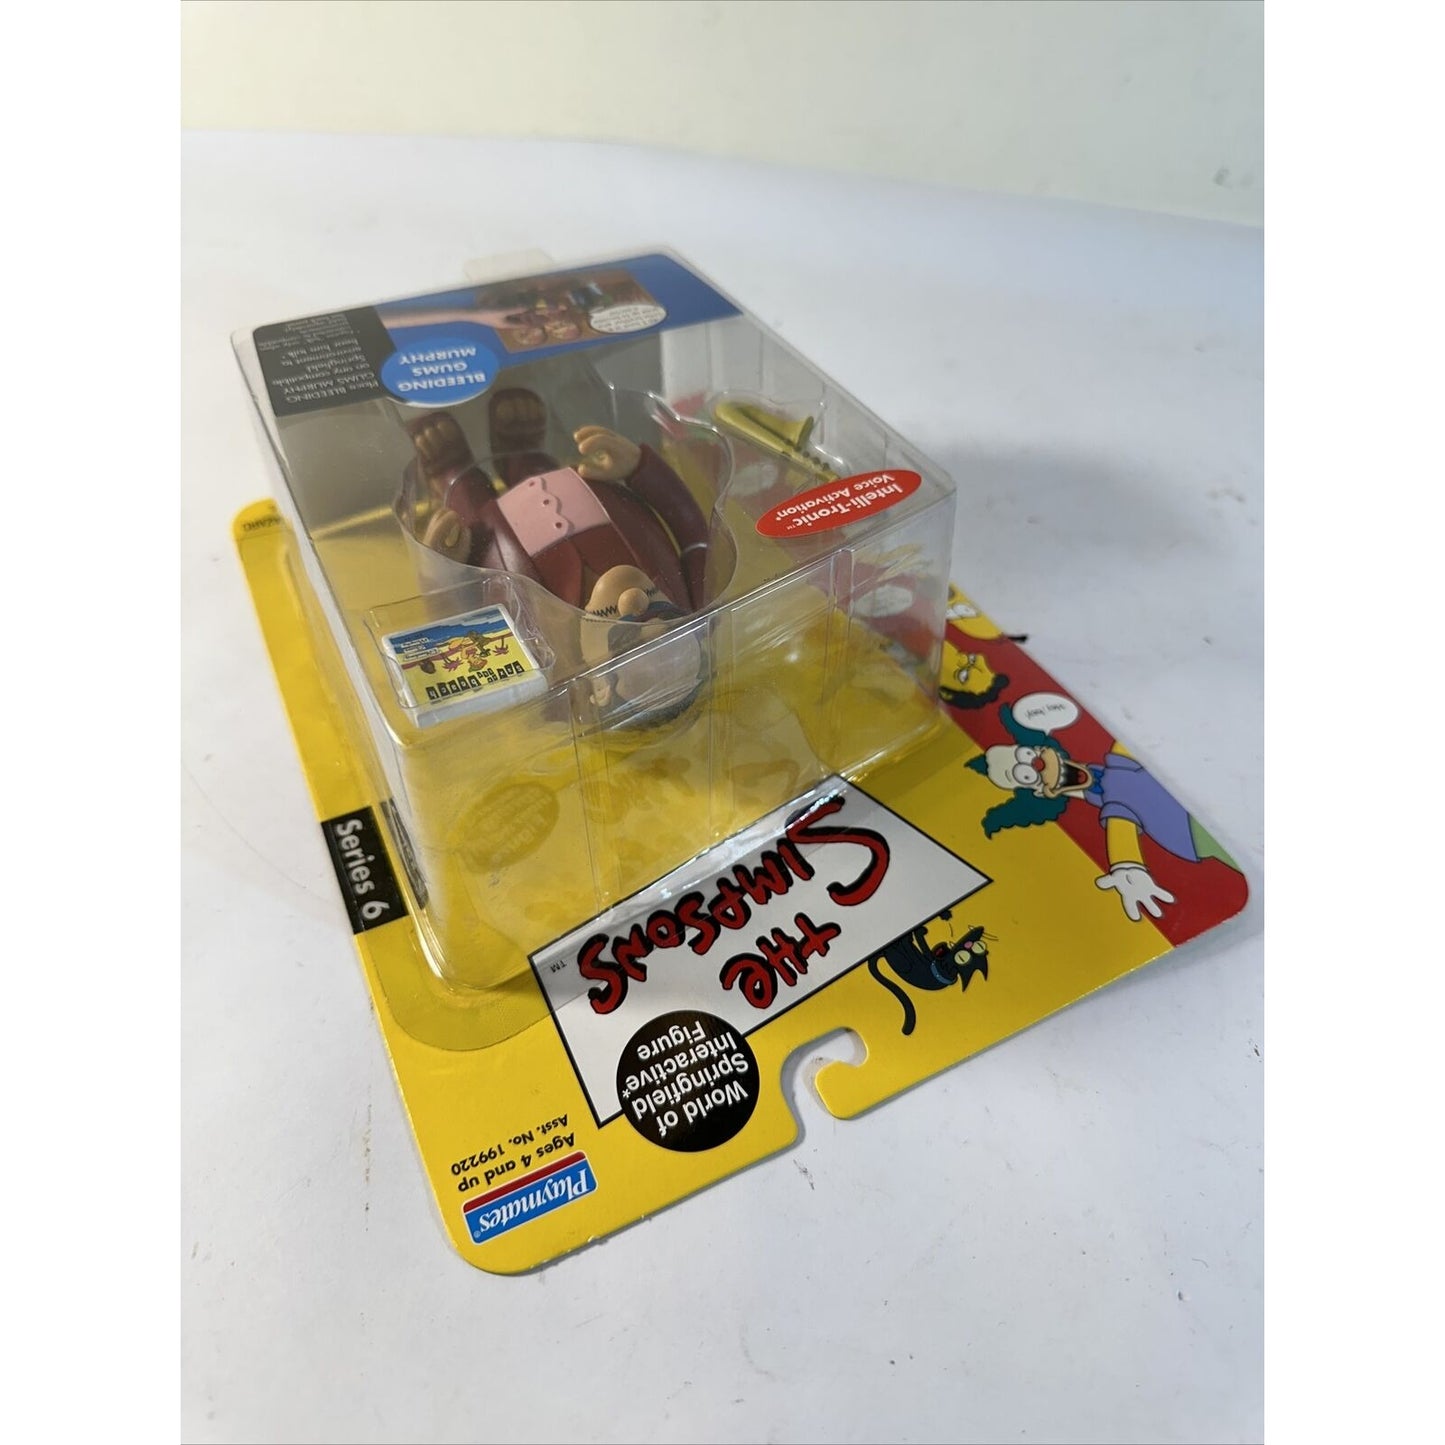 The Simpsons Bleeding Gums Murphy series 6 Playmates WOS Action Figure Playmates